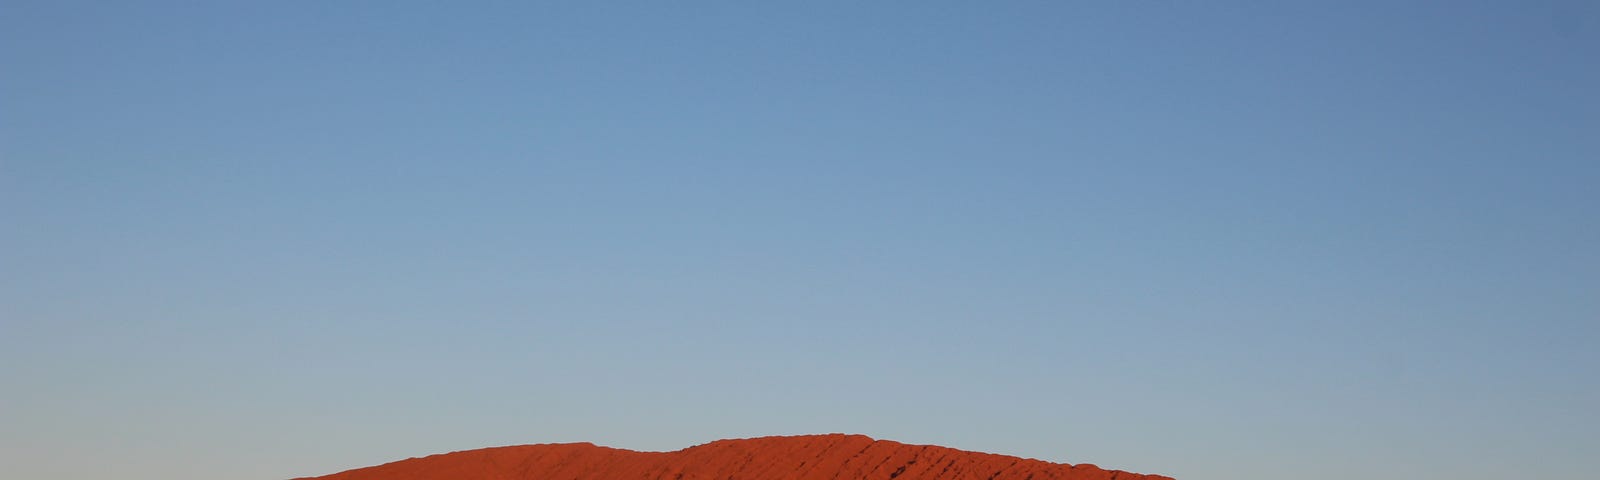 Uluru in the golden hour before sunset.